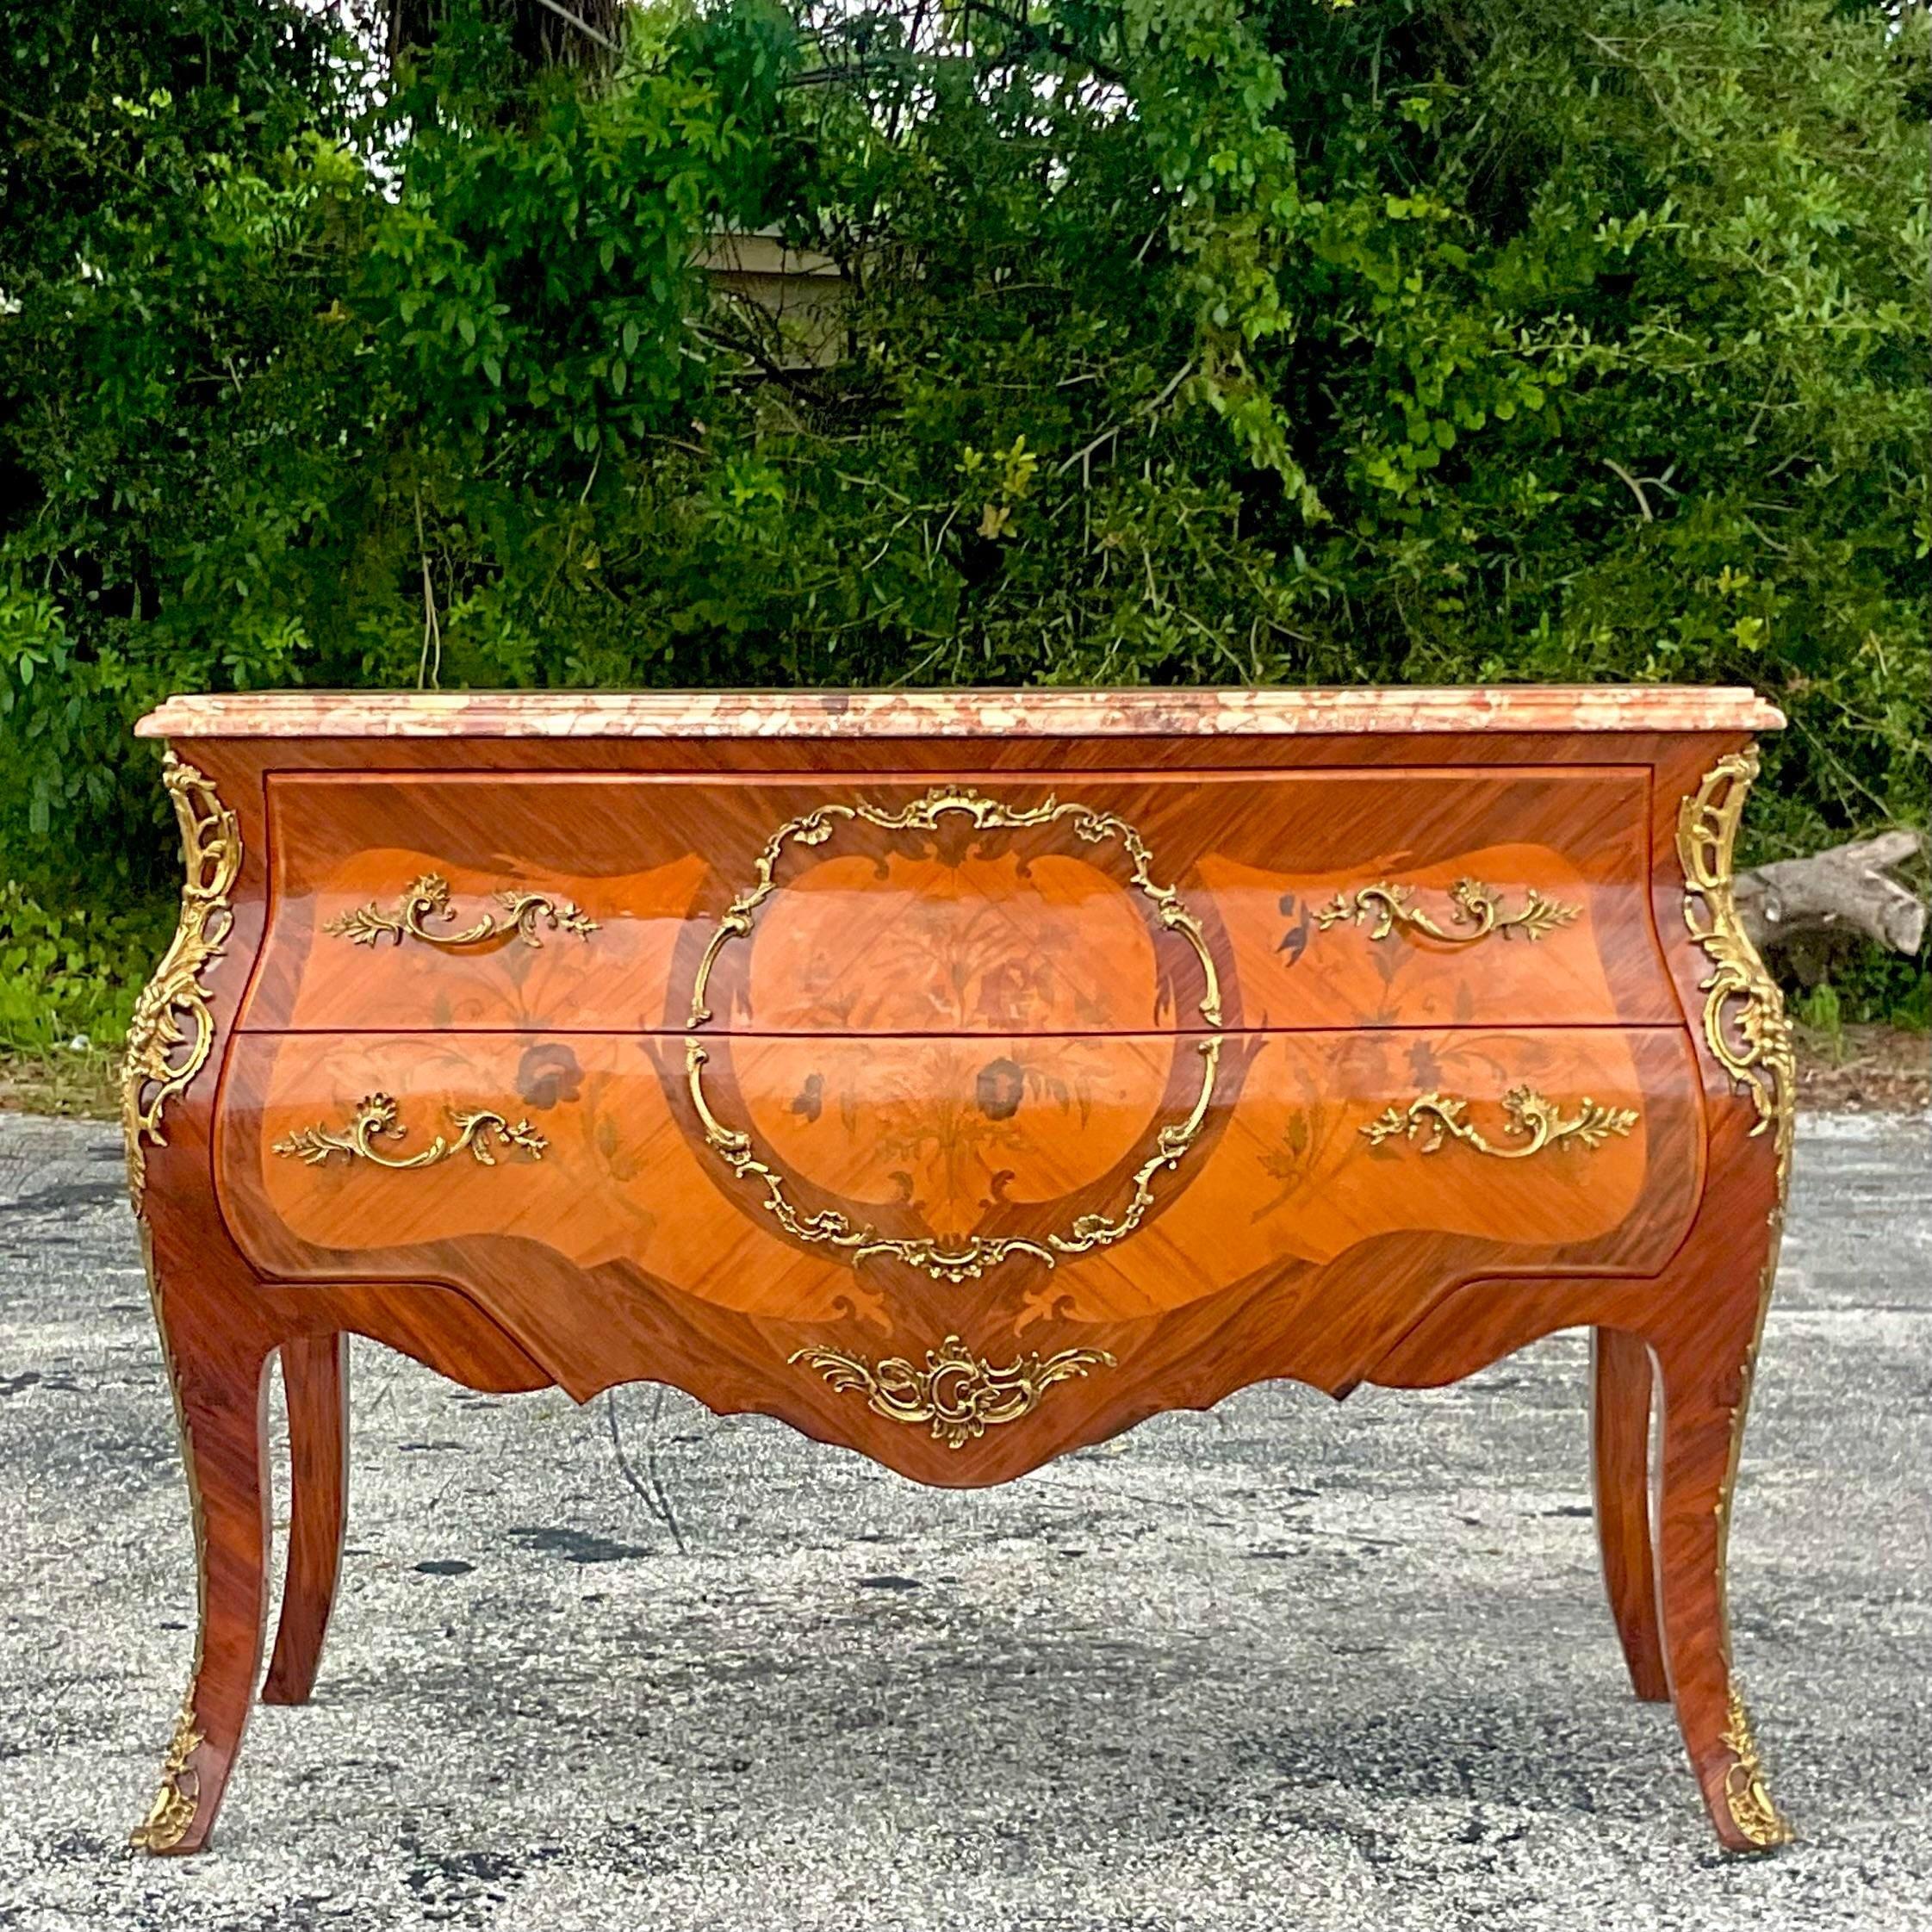 A fabulous vintage Regency chest of drawers. Beautiful floral marquetry detail with brass Ormolu detail. Fabulous stone top with beveled edge top. Acquired from a Palm Beach estate